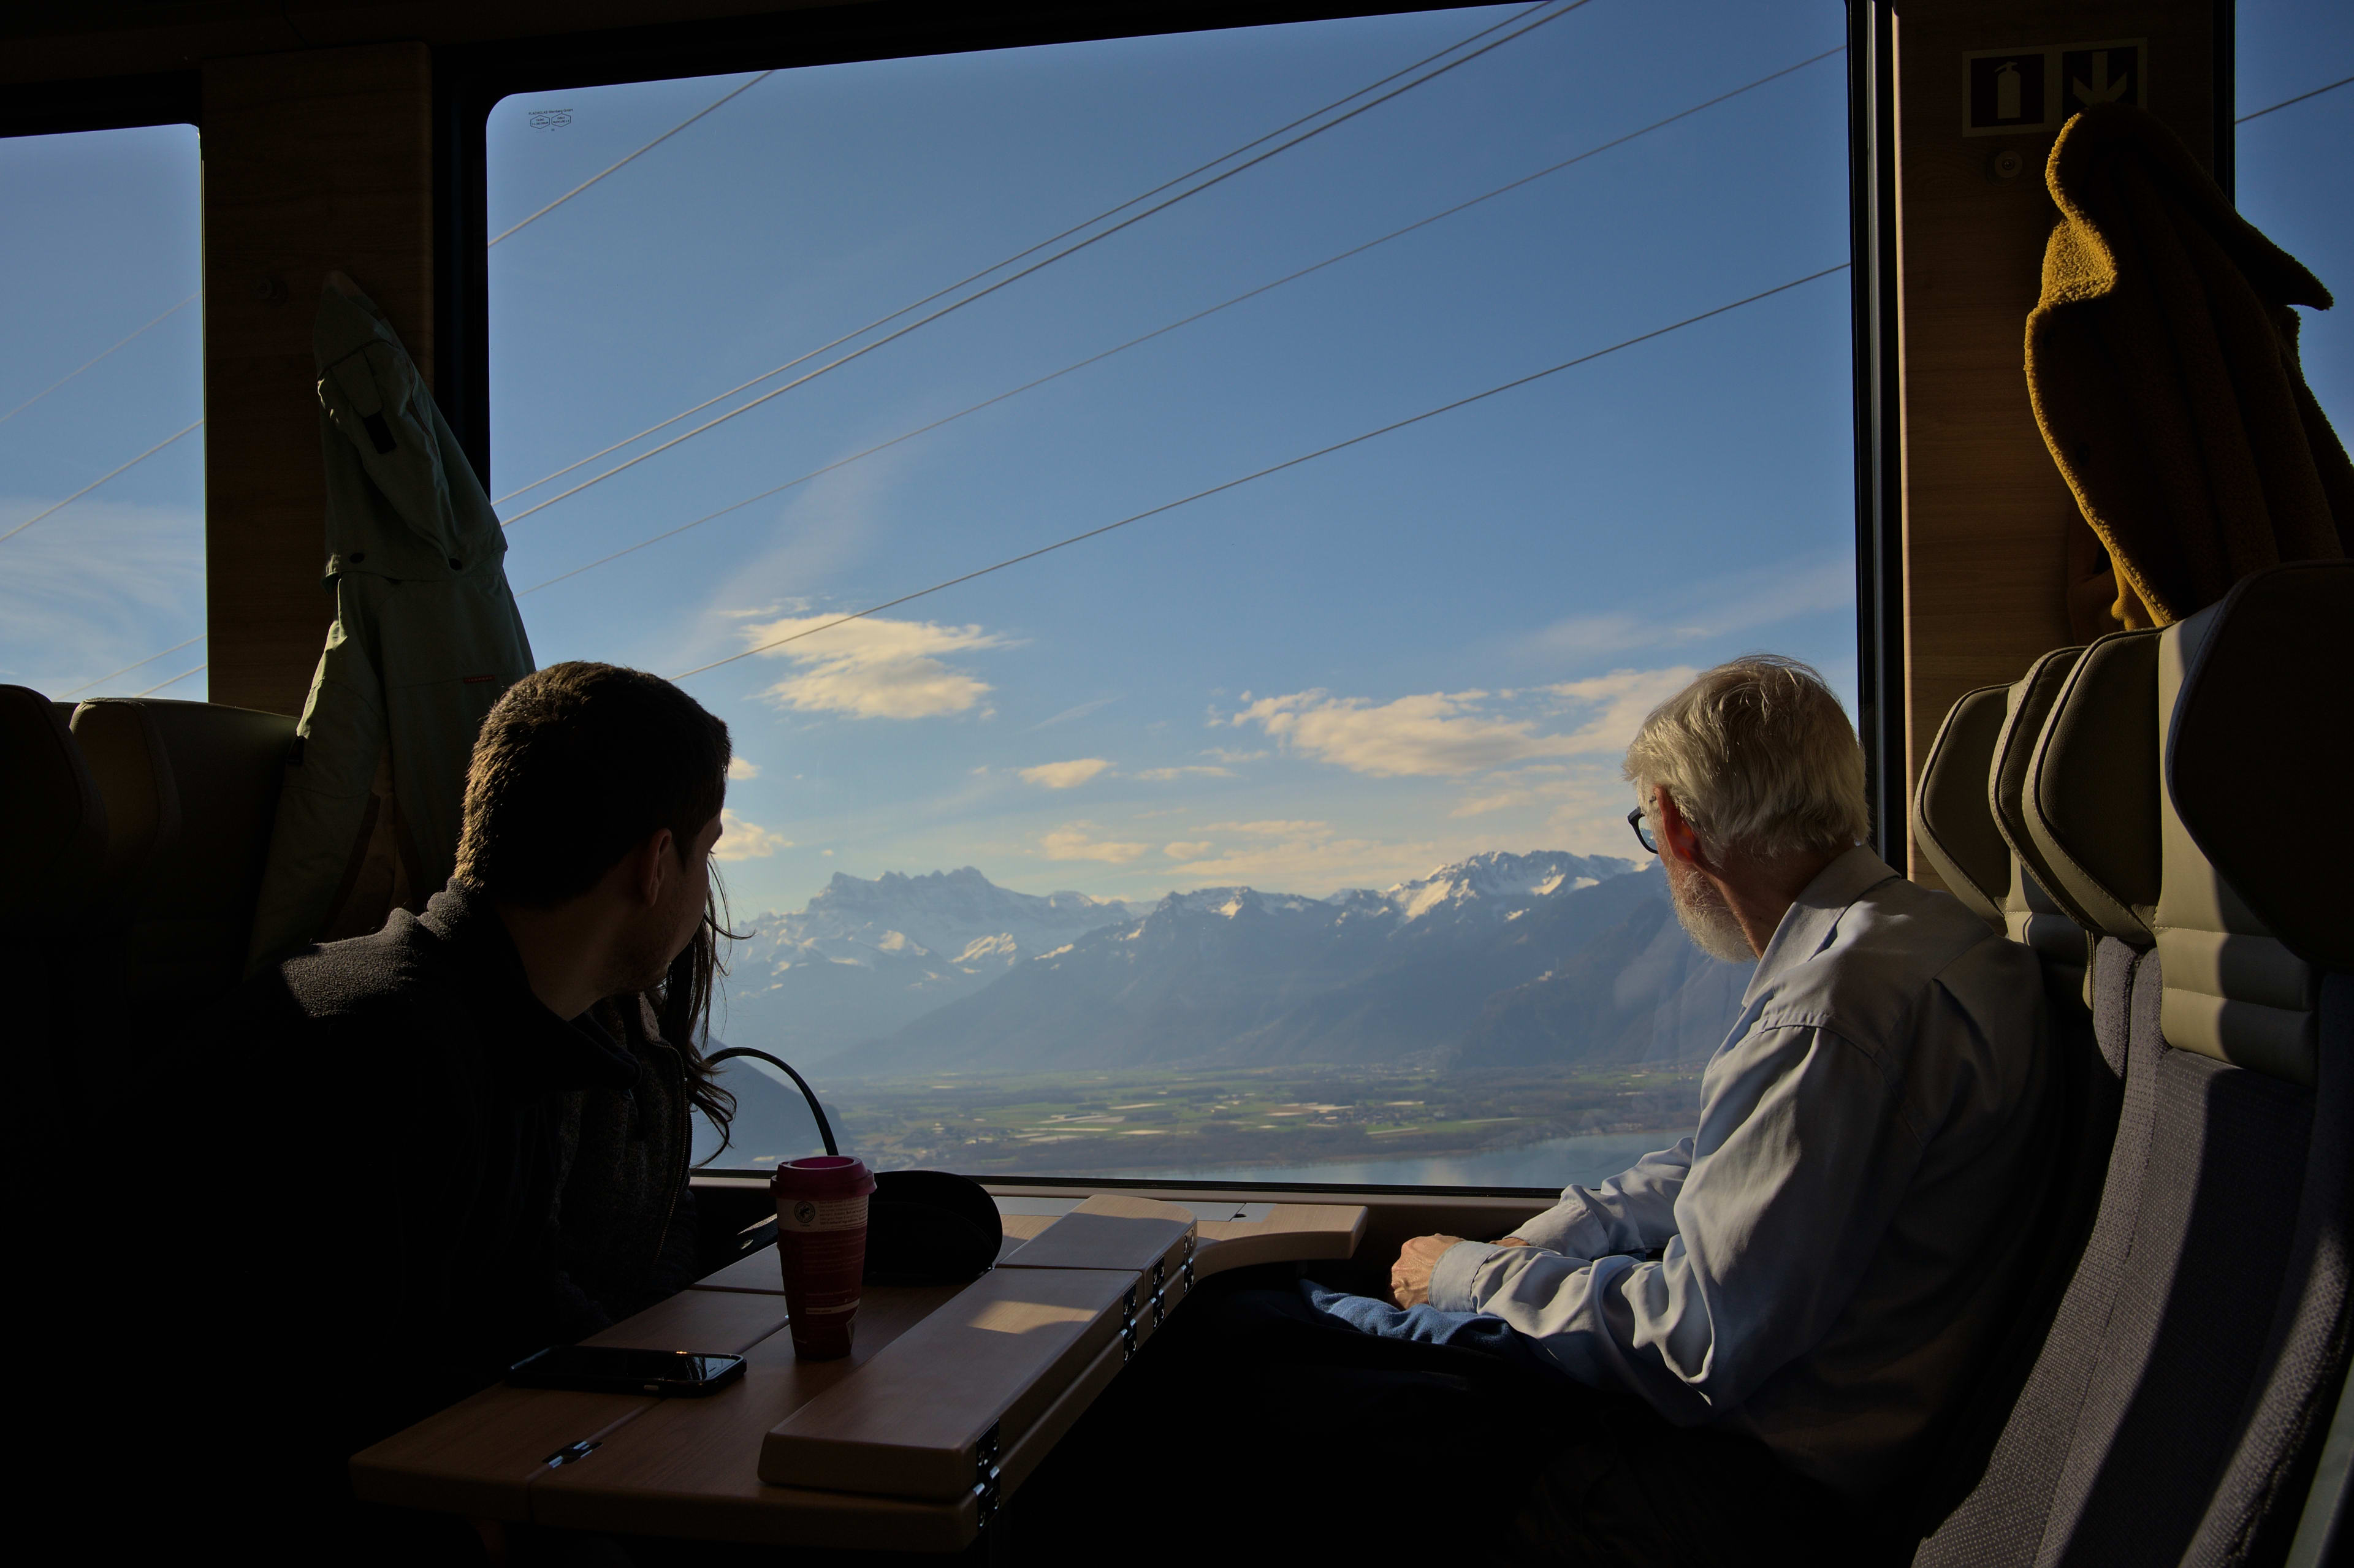 Take in the beautiful views of the Swiss Alps aboard the panoramic Golden Pass scenic train.